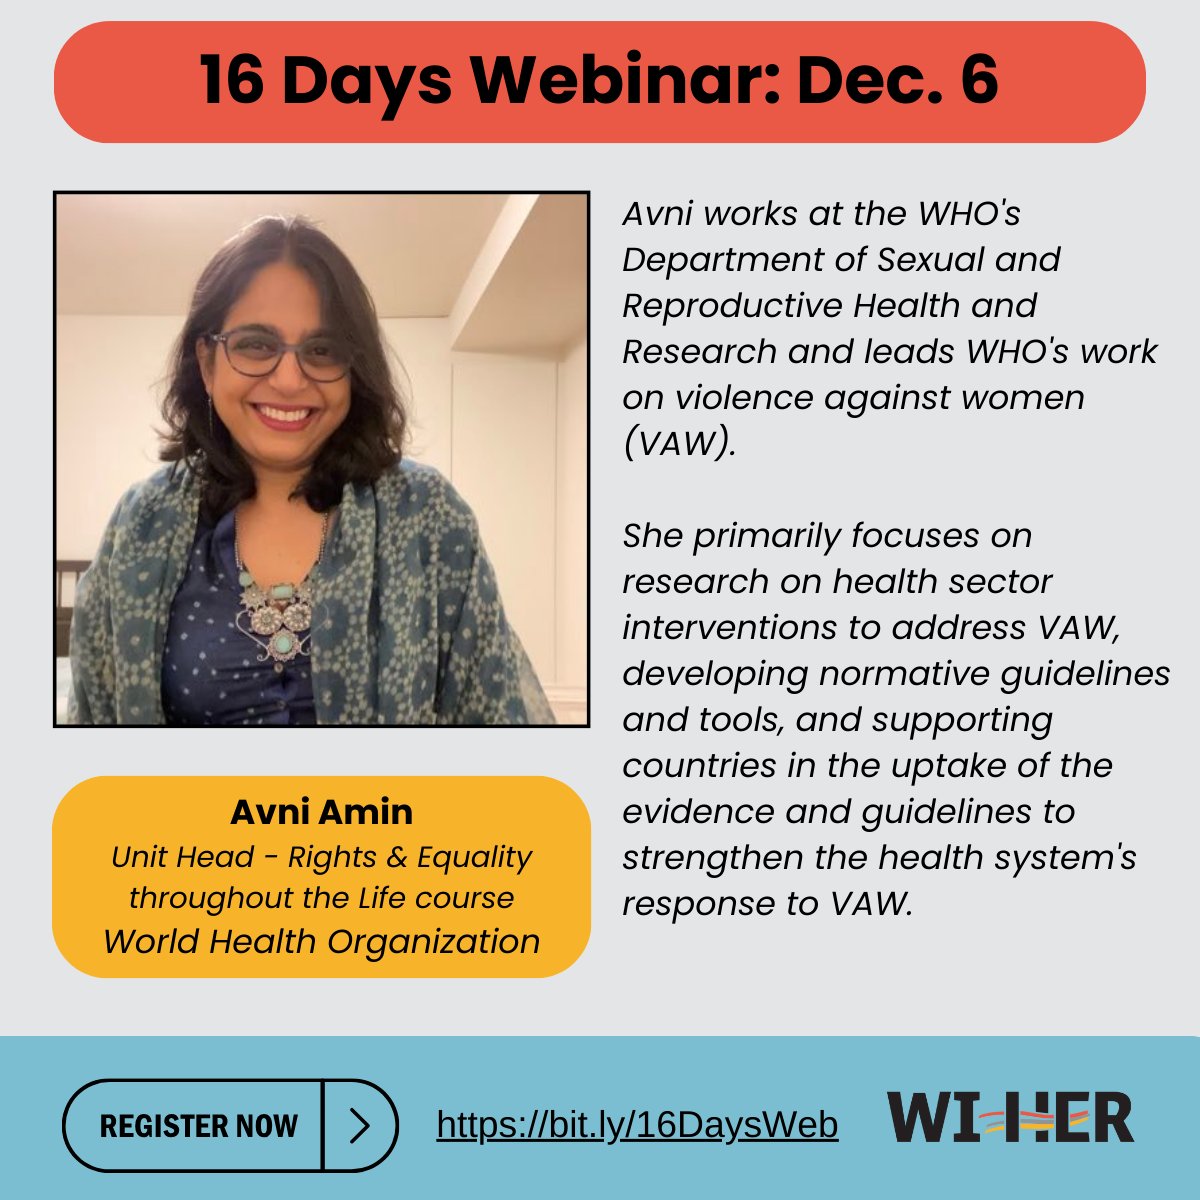 During our #16DaysOfActivism webinar on Dec 6, hear from Ms. @AvniNAmin, who will discuss how a @WHO curriculum for healthcare professionals has been used to strengthen #Healthcare systems in their approaches to GBV prevention & response. bit.ly/16DaysWeb @HRPResearch